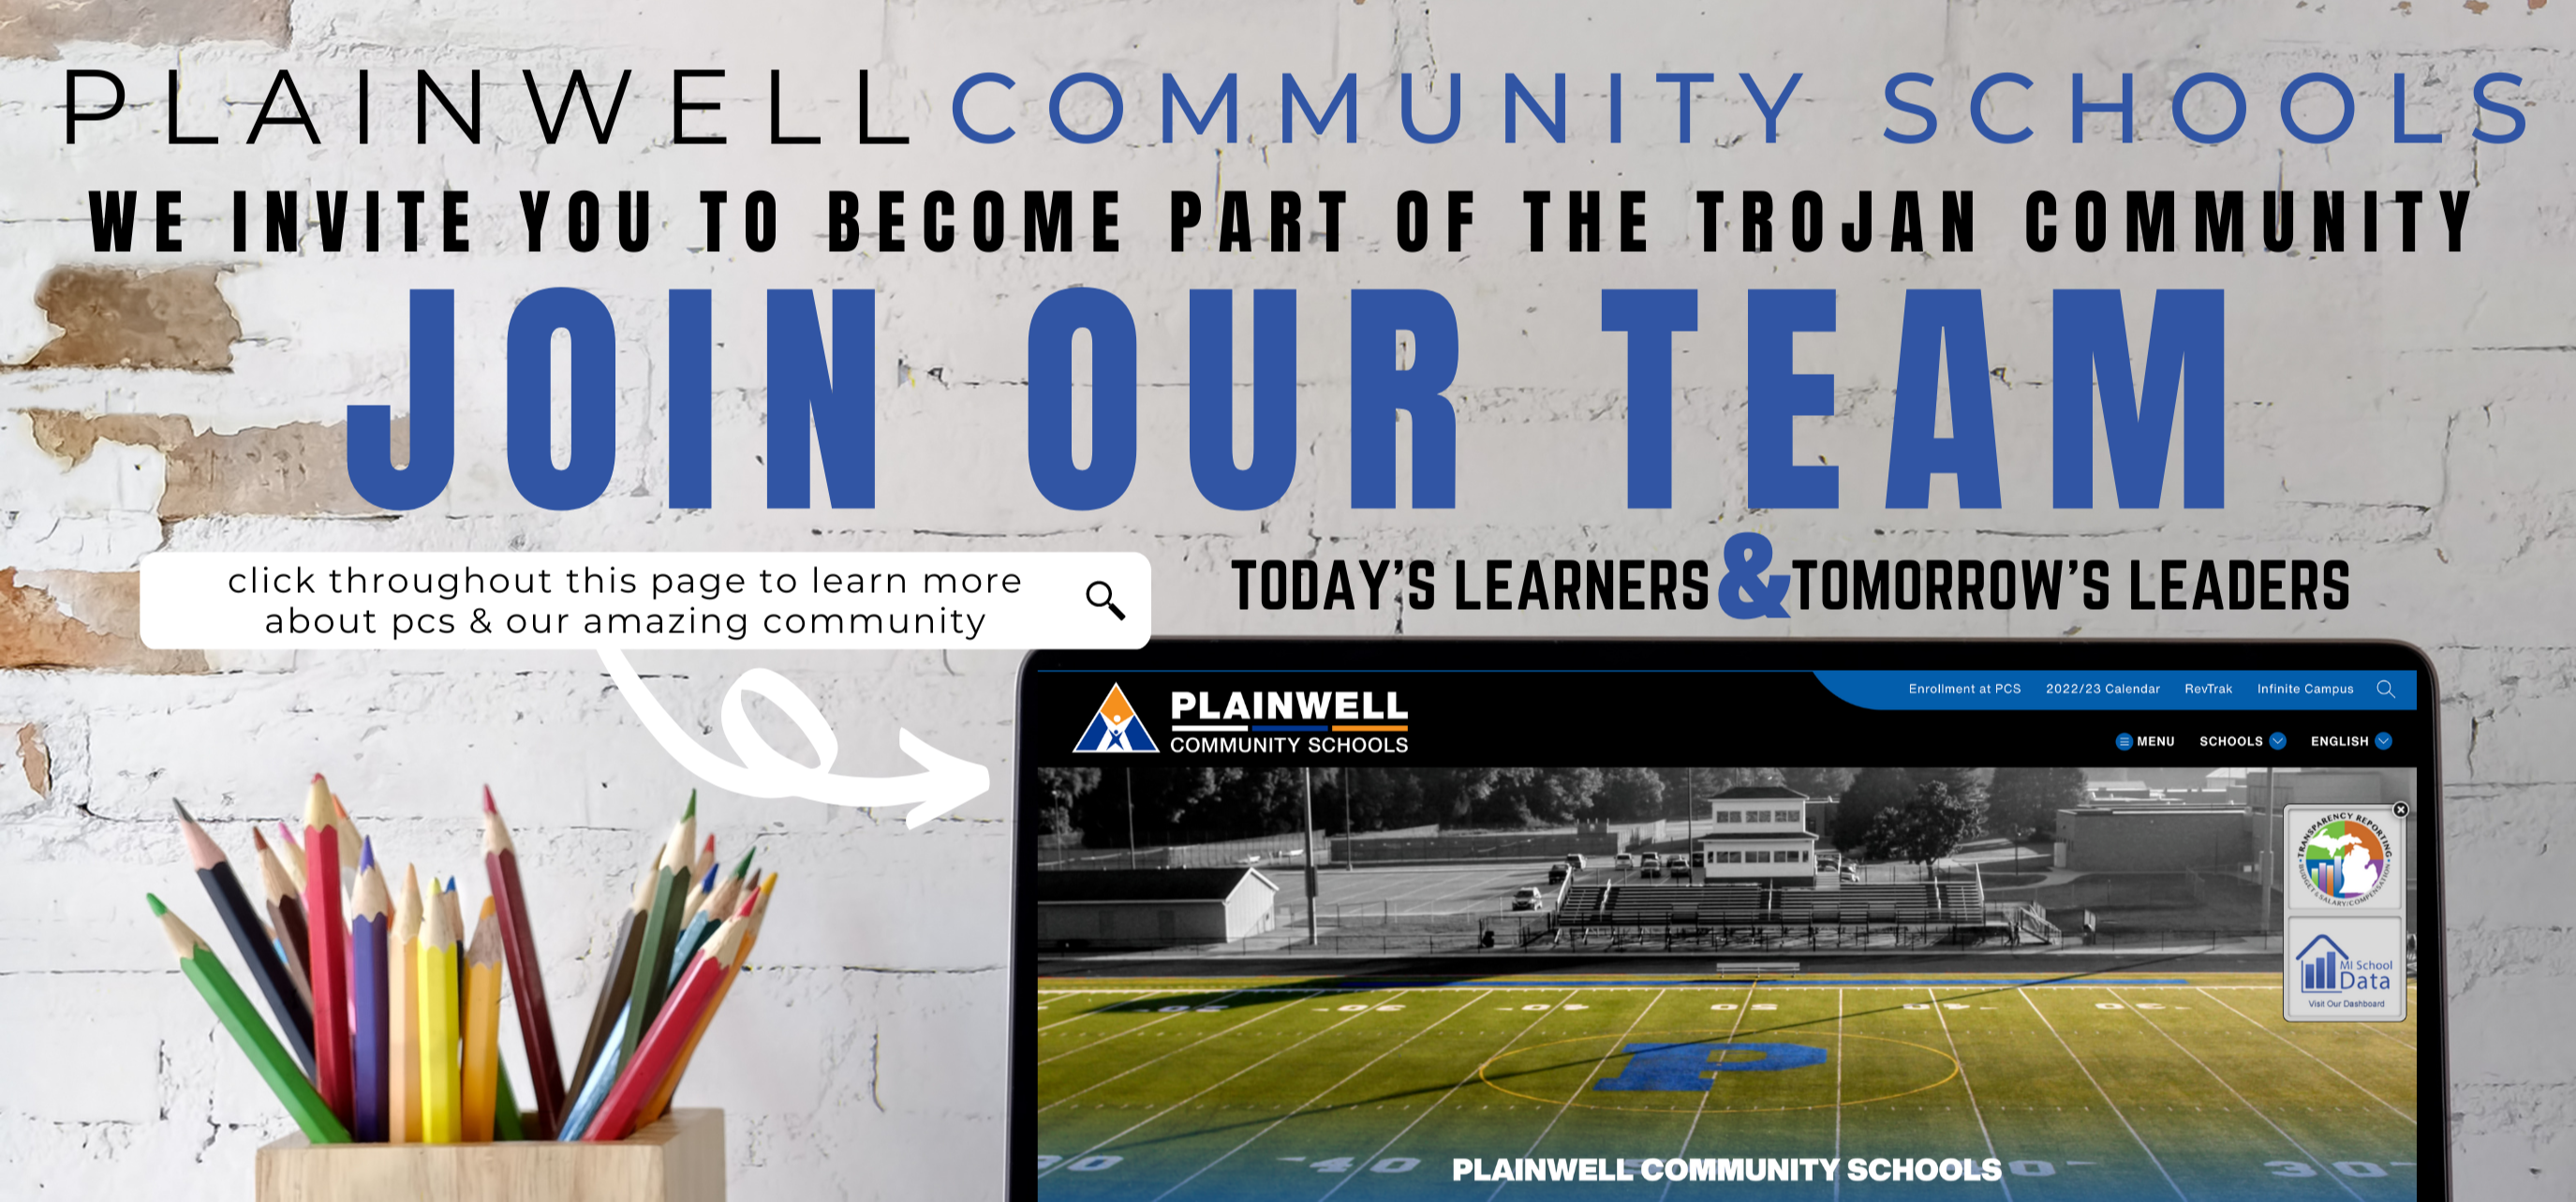 Plainwell Community Schools - WE INVITE YOU TO BECOME PART OF THE TROJAN COMMUNITY - click throughout this page to learn more about pcs & our amazing community  - Today's Learners & Tomorrow's Leaders